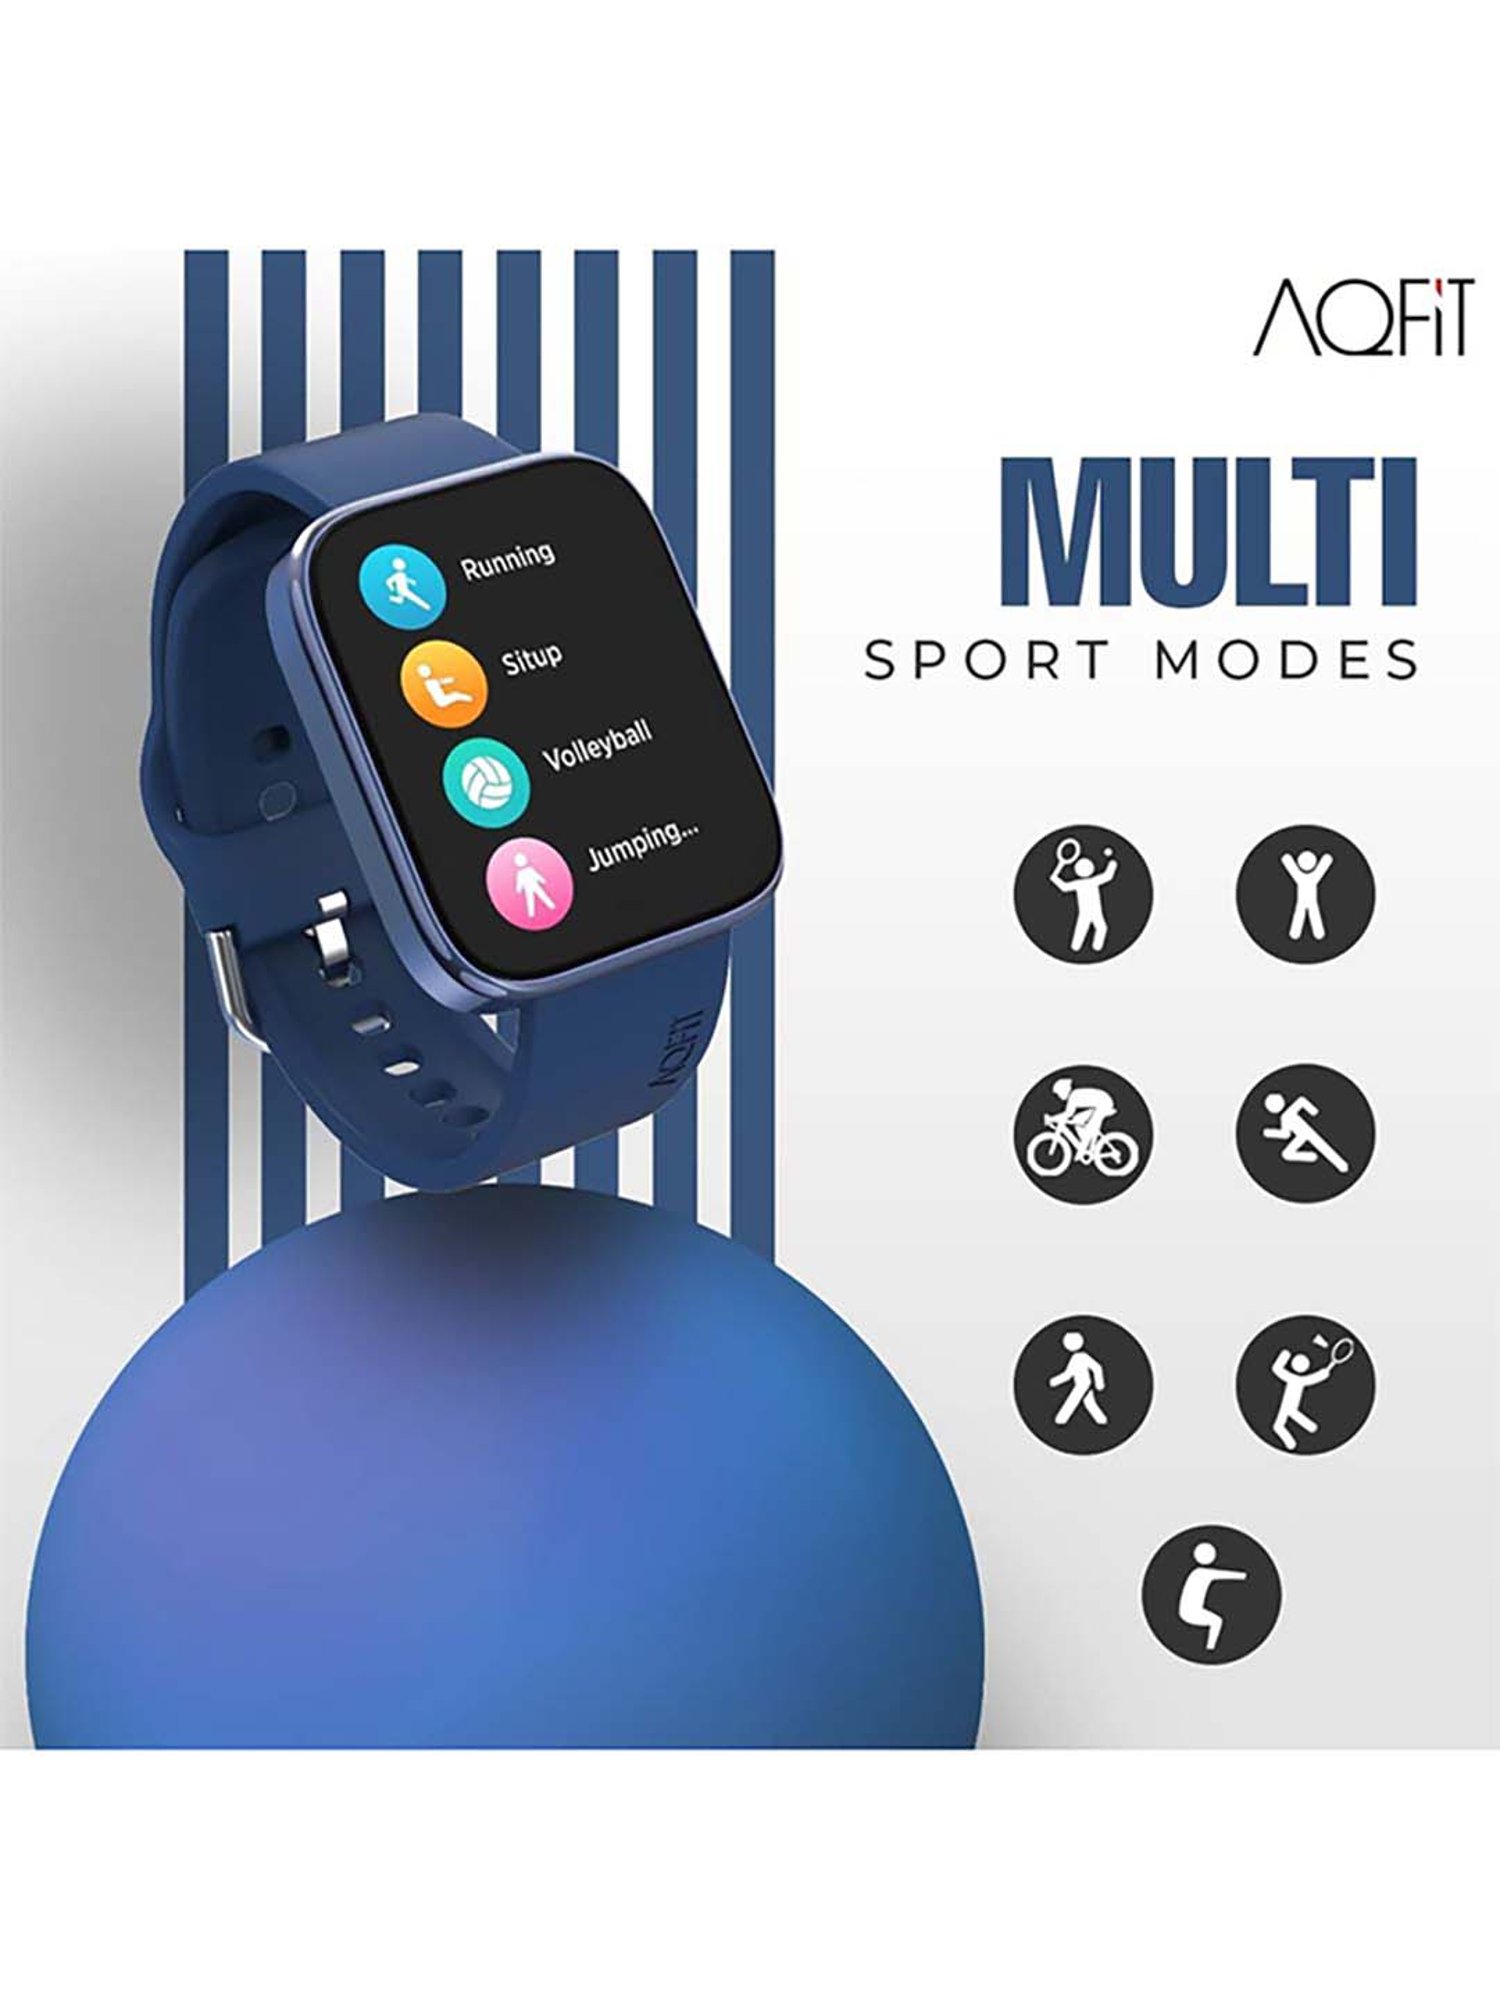 Buy a watch and get a phone for free!! Looking to buy a watch. Seize this  opportunity and buy an AQfit watch and get a free KGTEL Phone... | Instagram